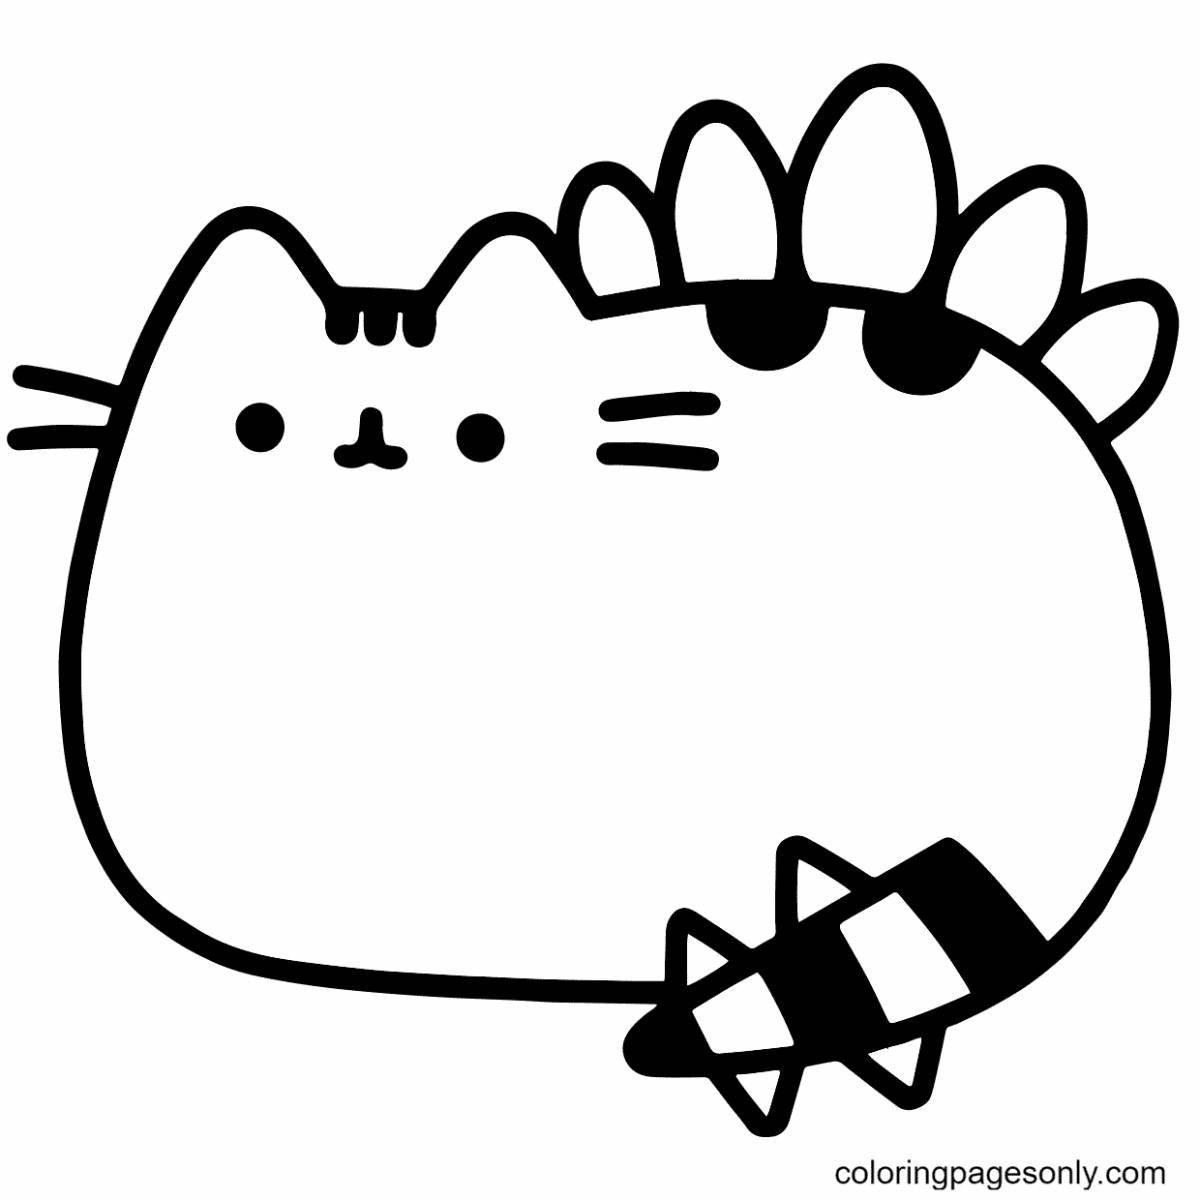 Exquisite pusheen mermaid coloring page